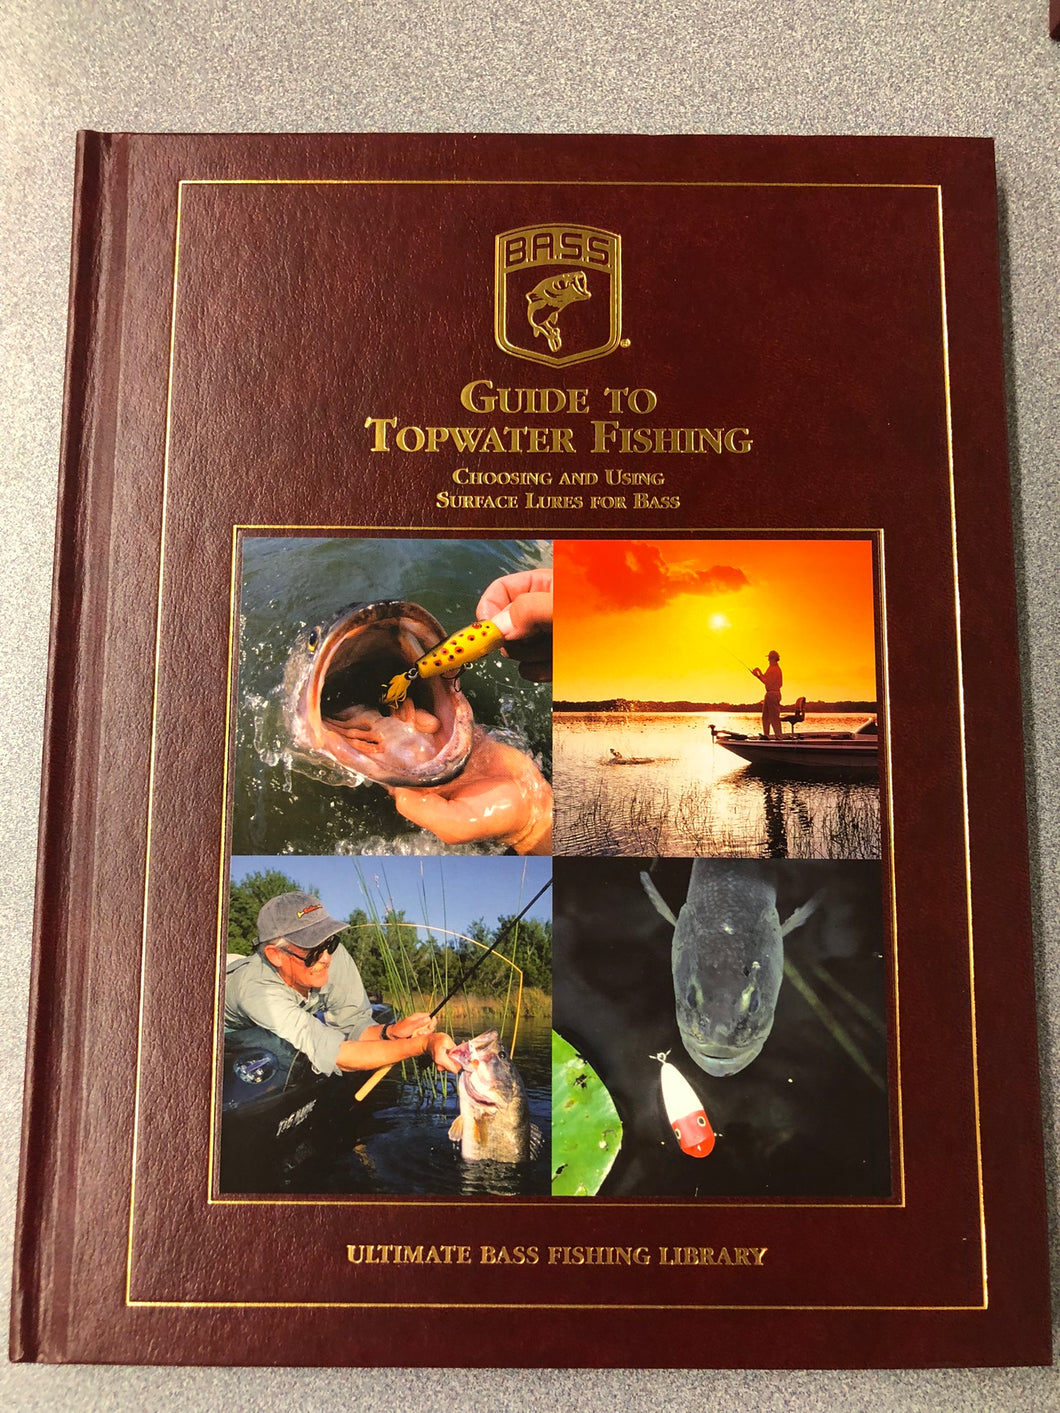 Guide to Topwater Fishing: Choosing and Using Surface Lures for Bass, Precht, Dave ed., [2004] OU 5/22